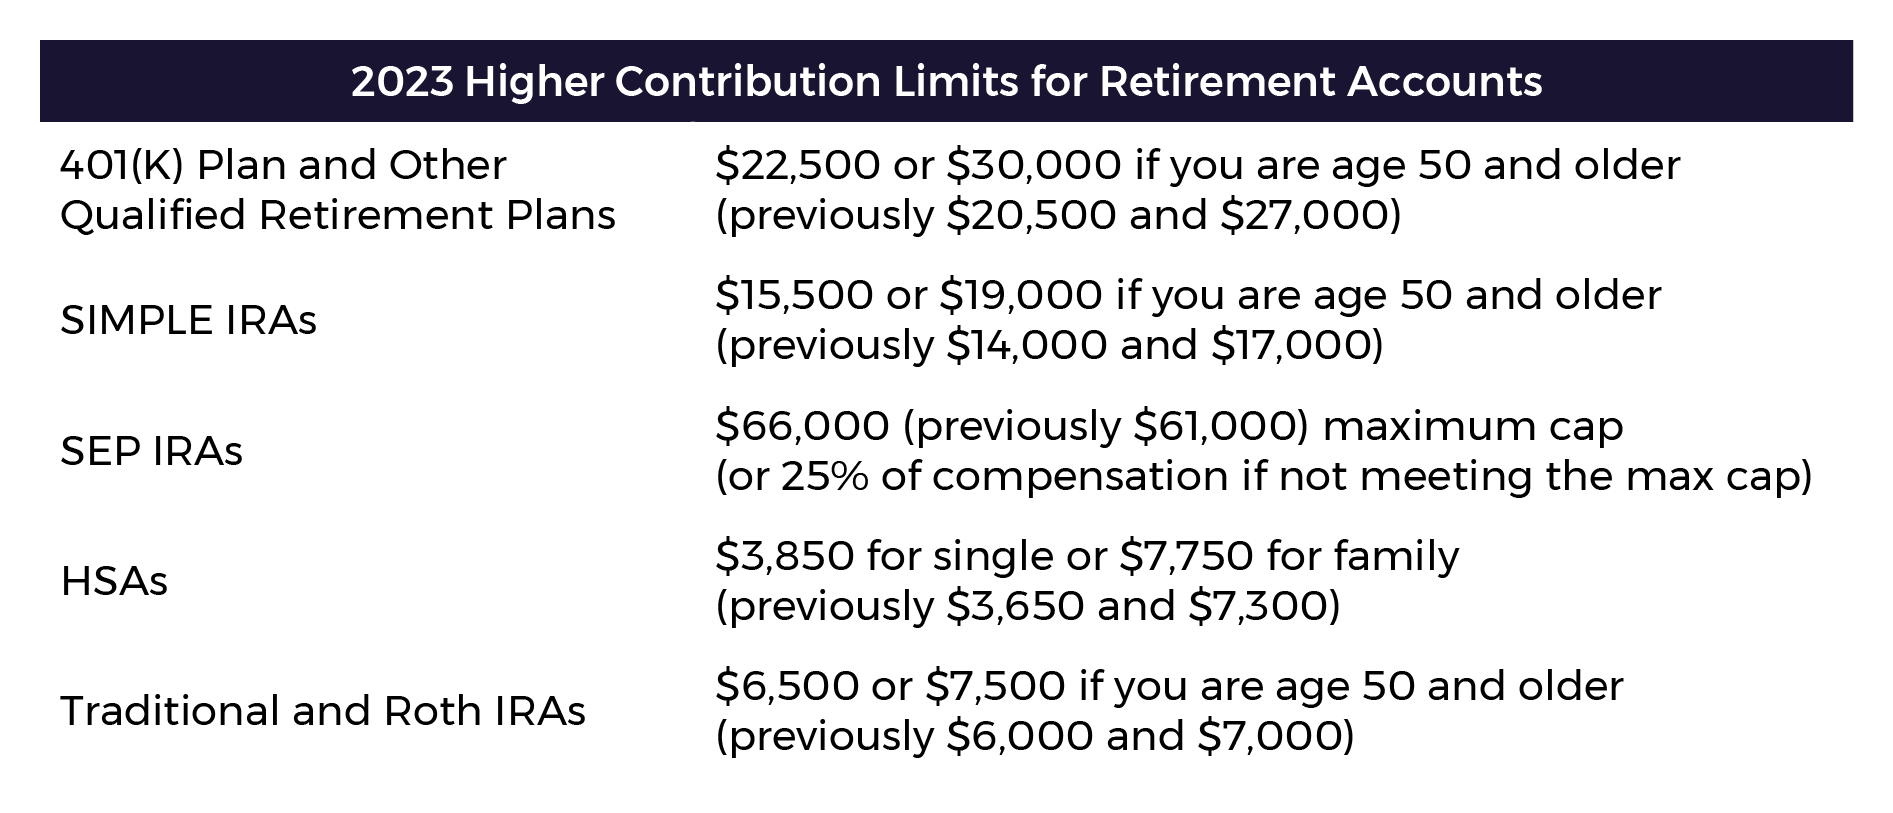 2023 Higher Contribution Limits for Retirement Accounts Table